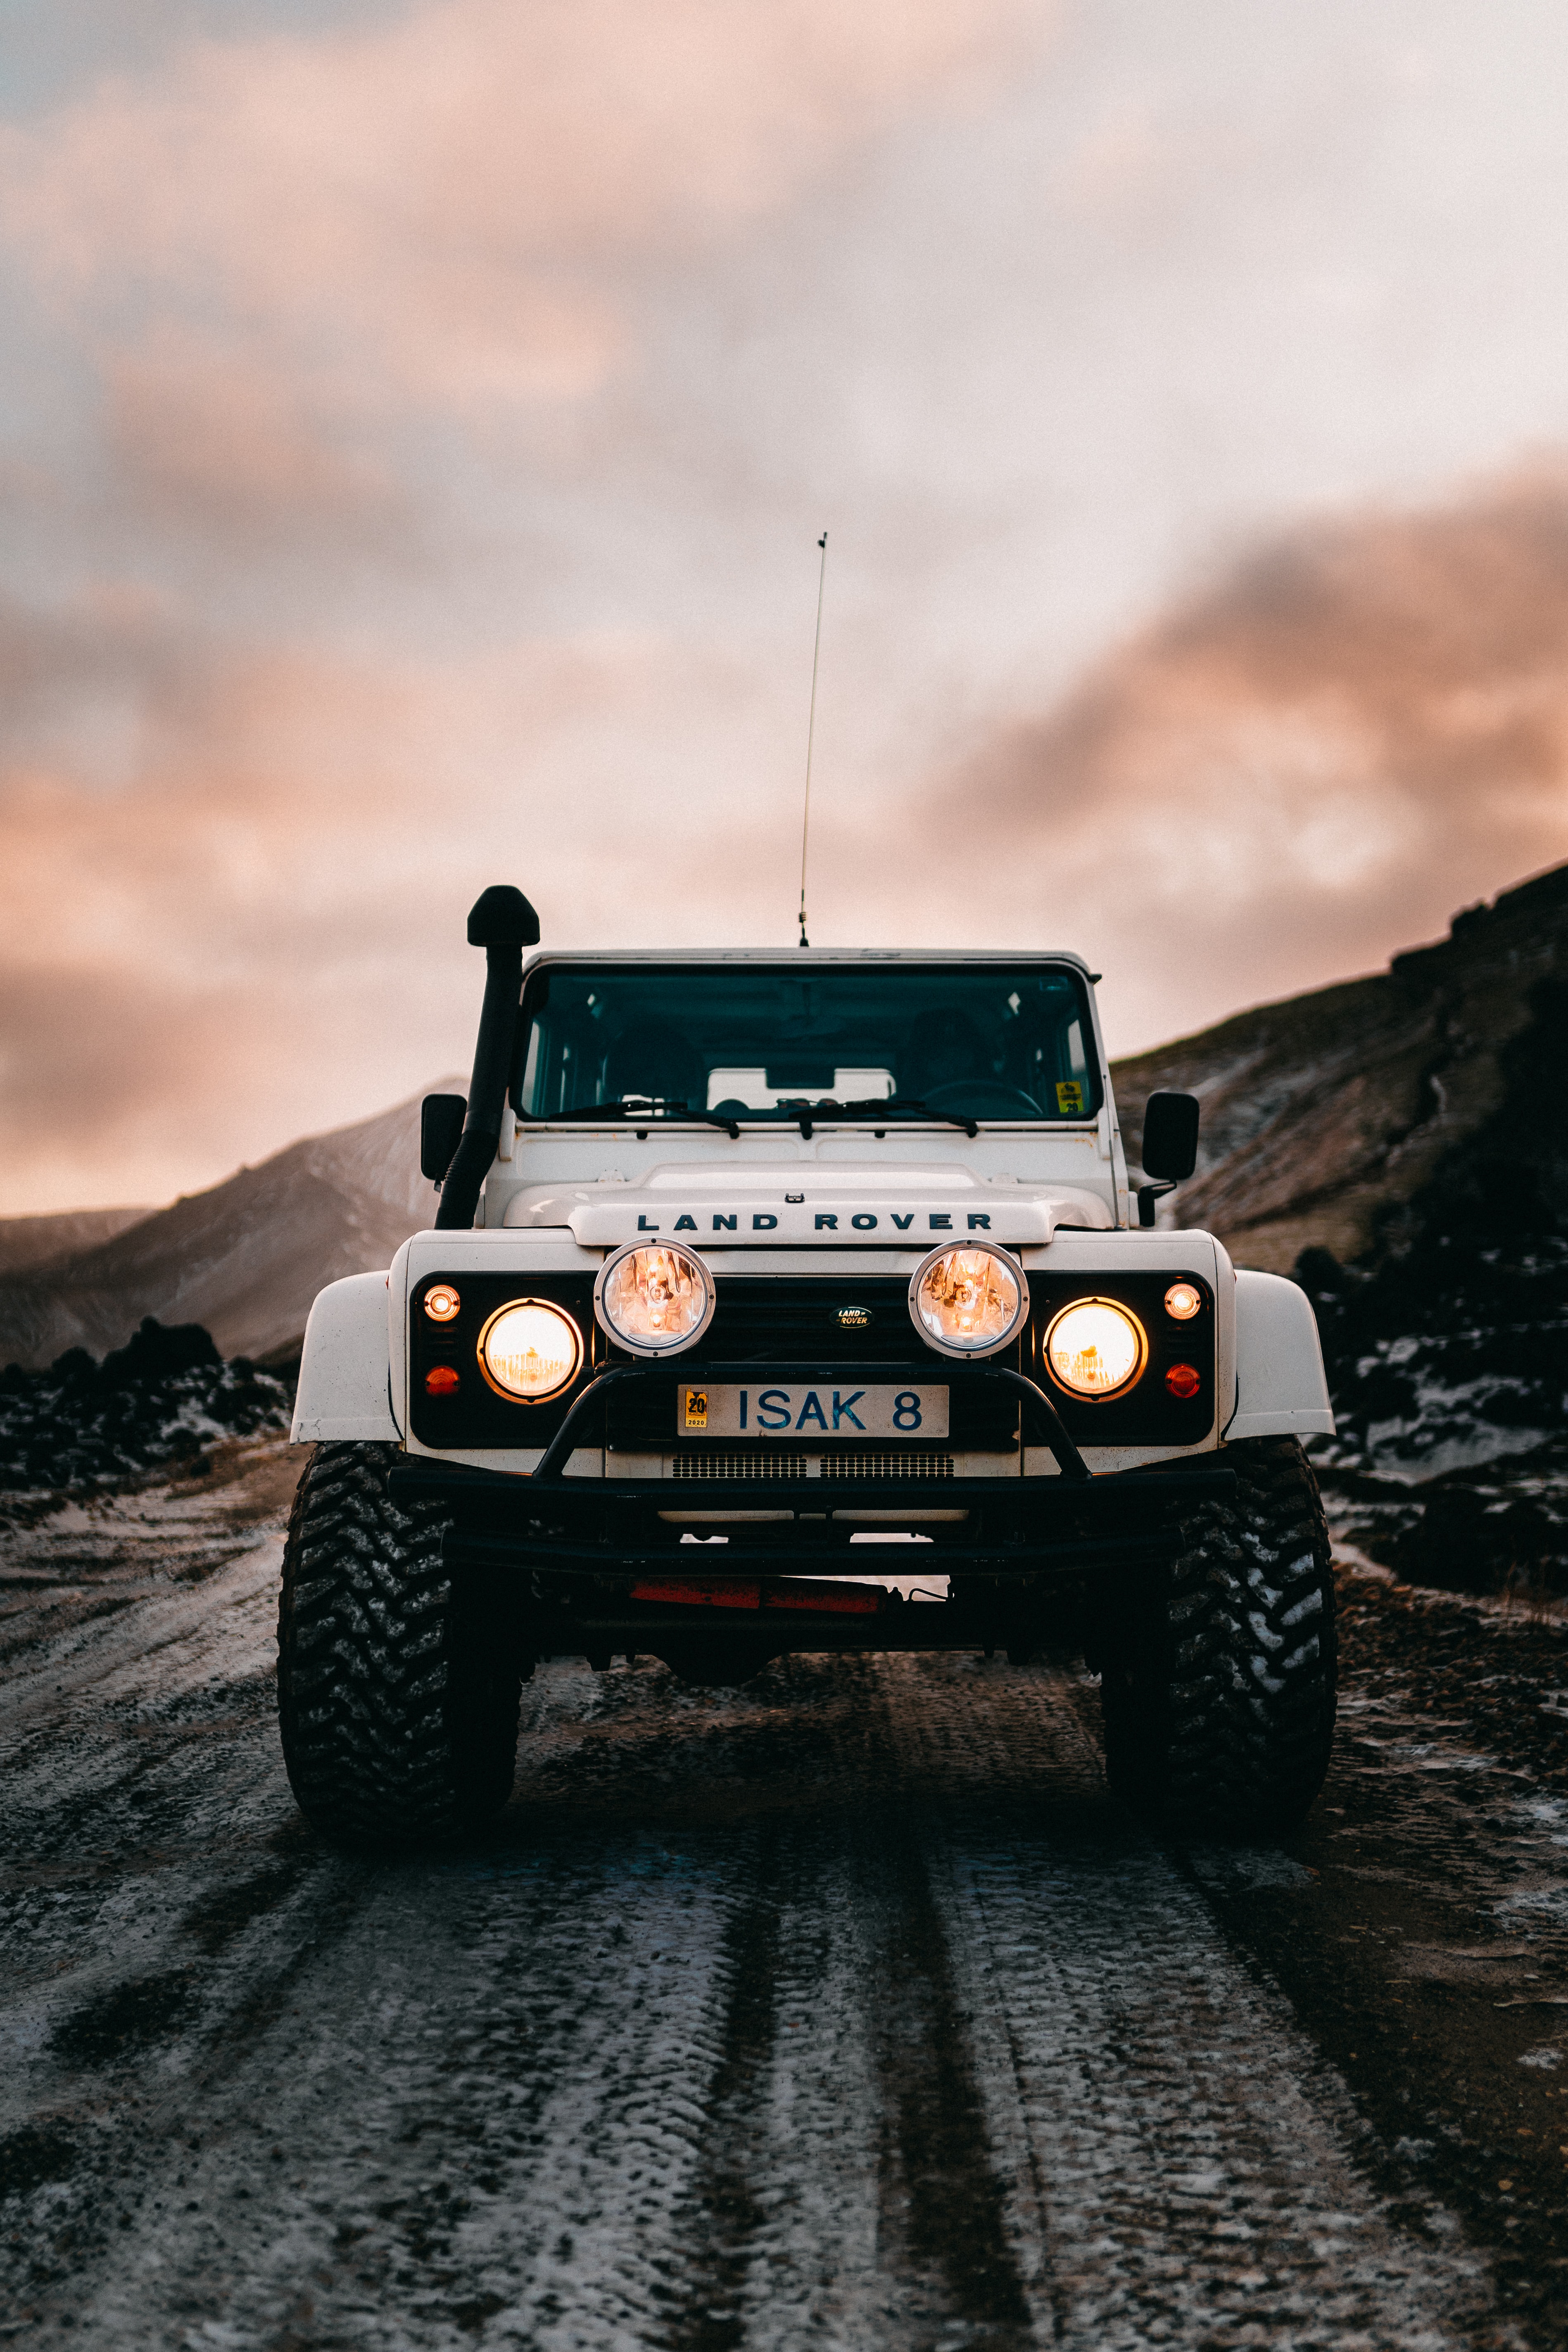 land rover, lights, front view, cars, white, car, machine, headlights Full HD